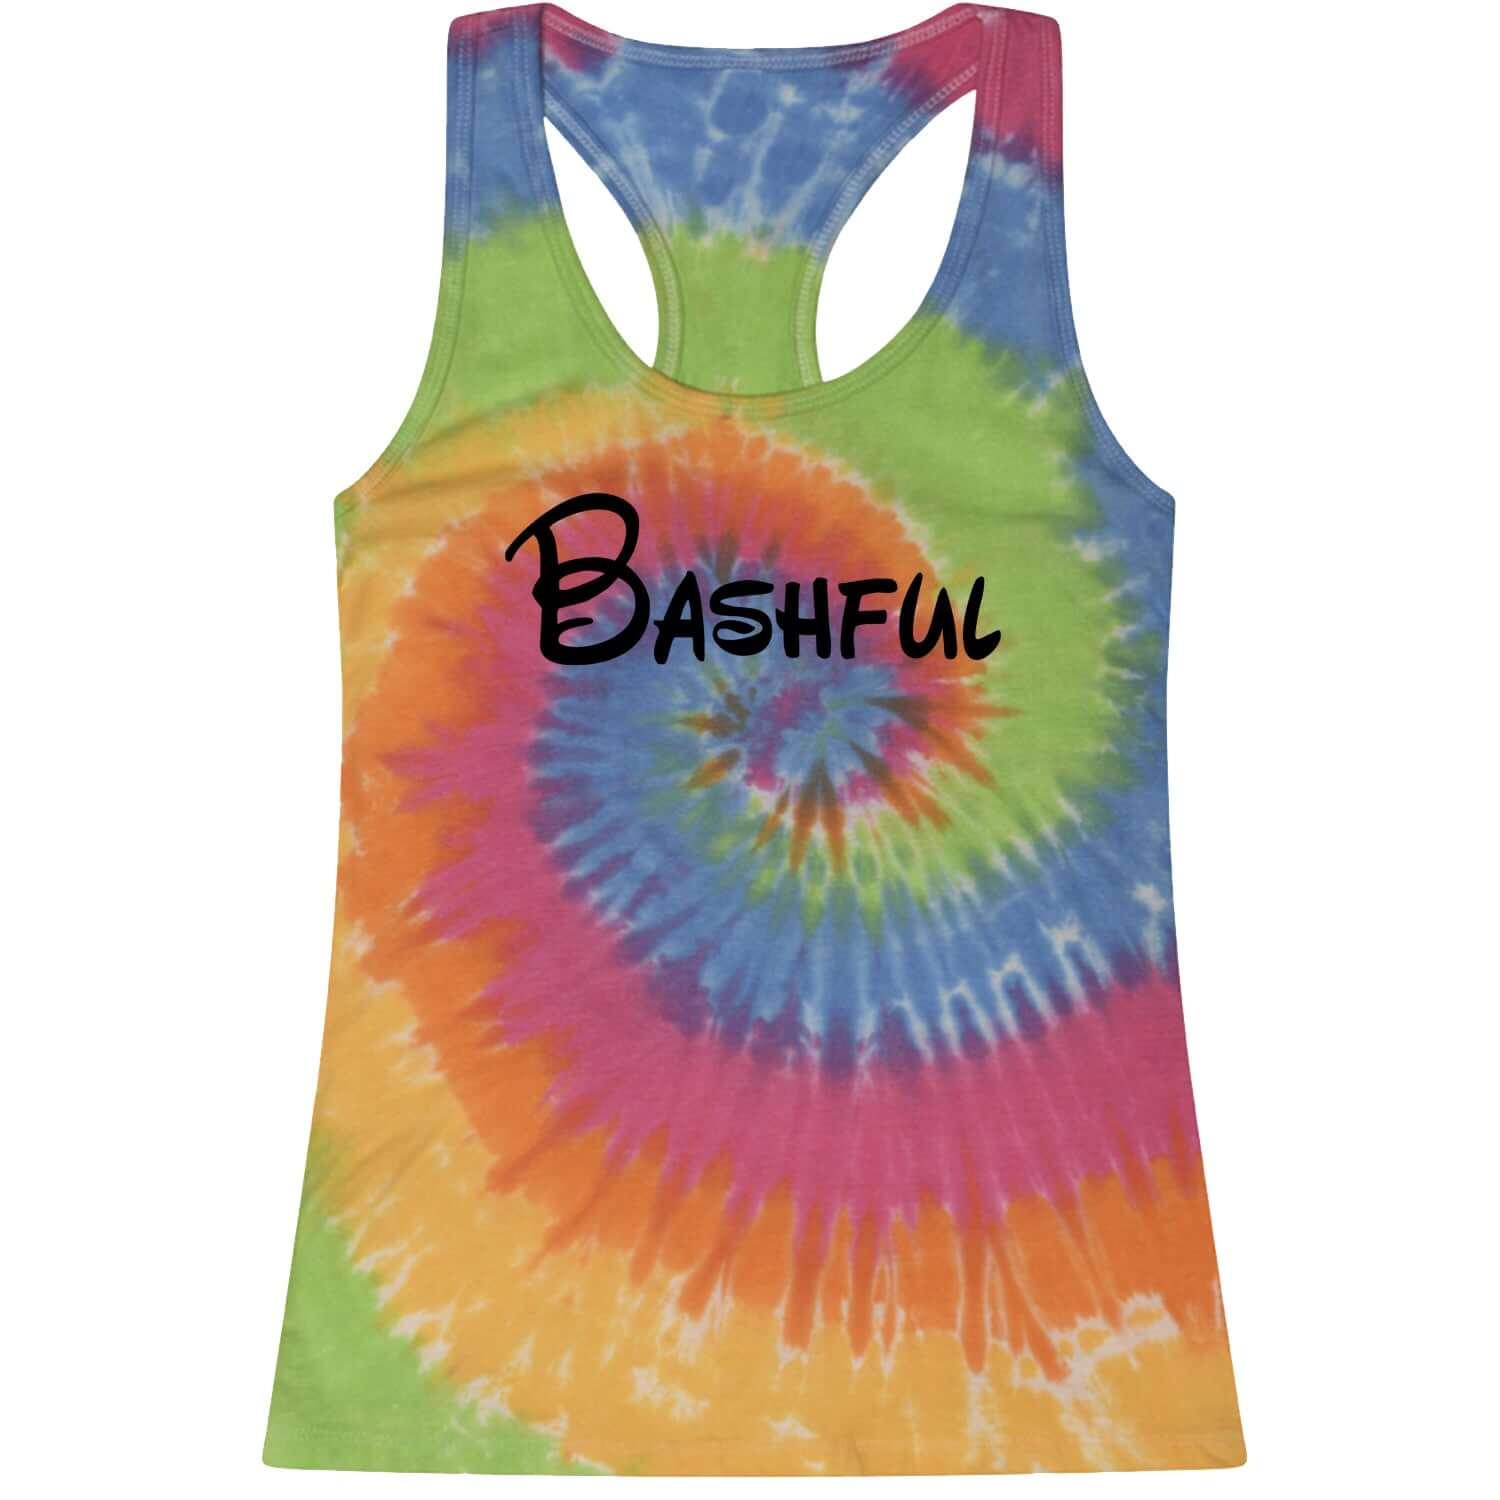 Bashful - 7 Dwarfs Costume Racerback Tank Top for Women and, costume, dwarfs, group, halloween, matching, seven, snow, the, white by Expression Tees